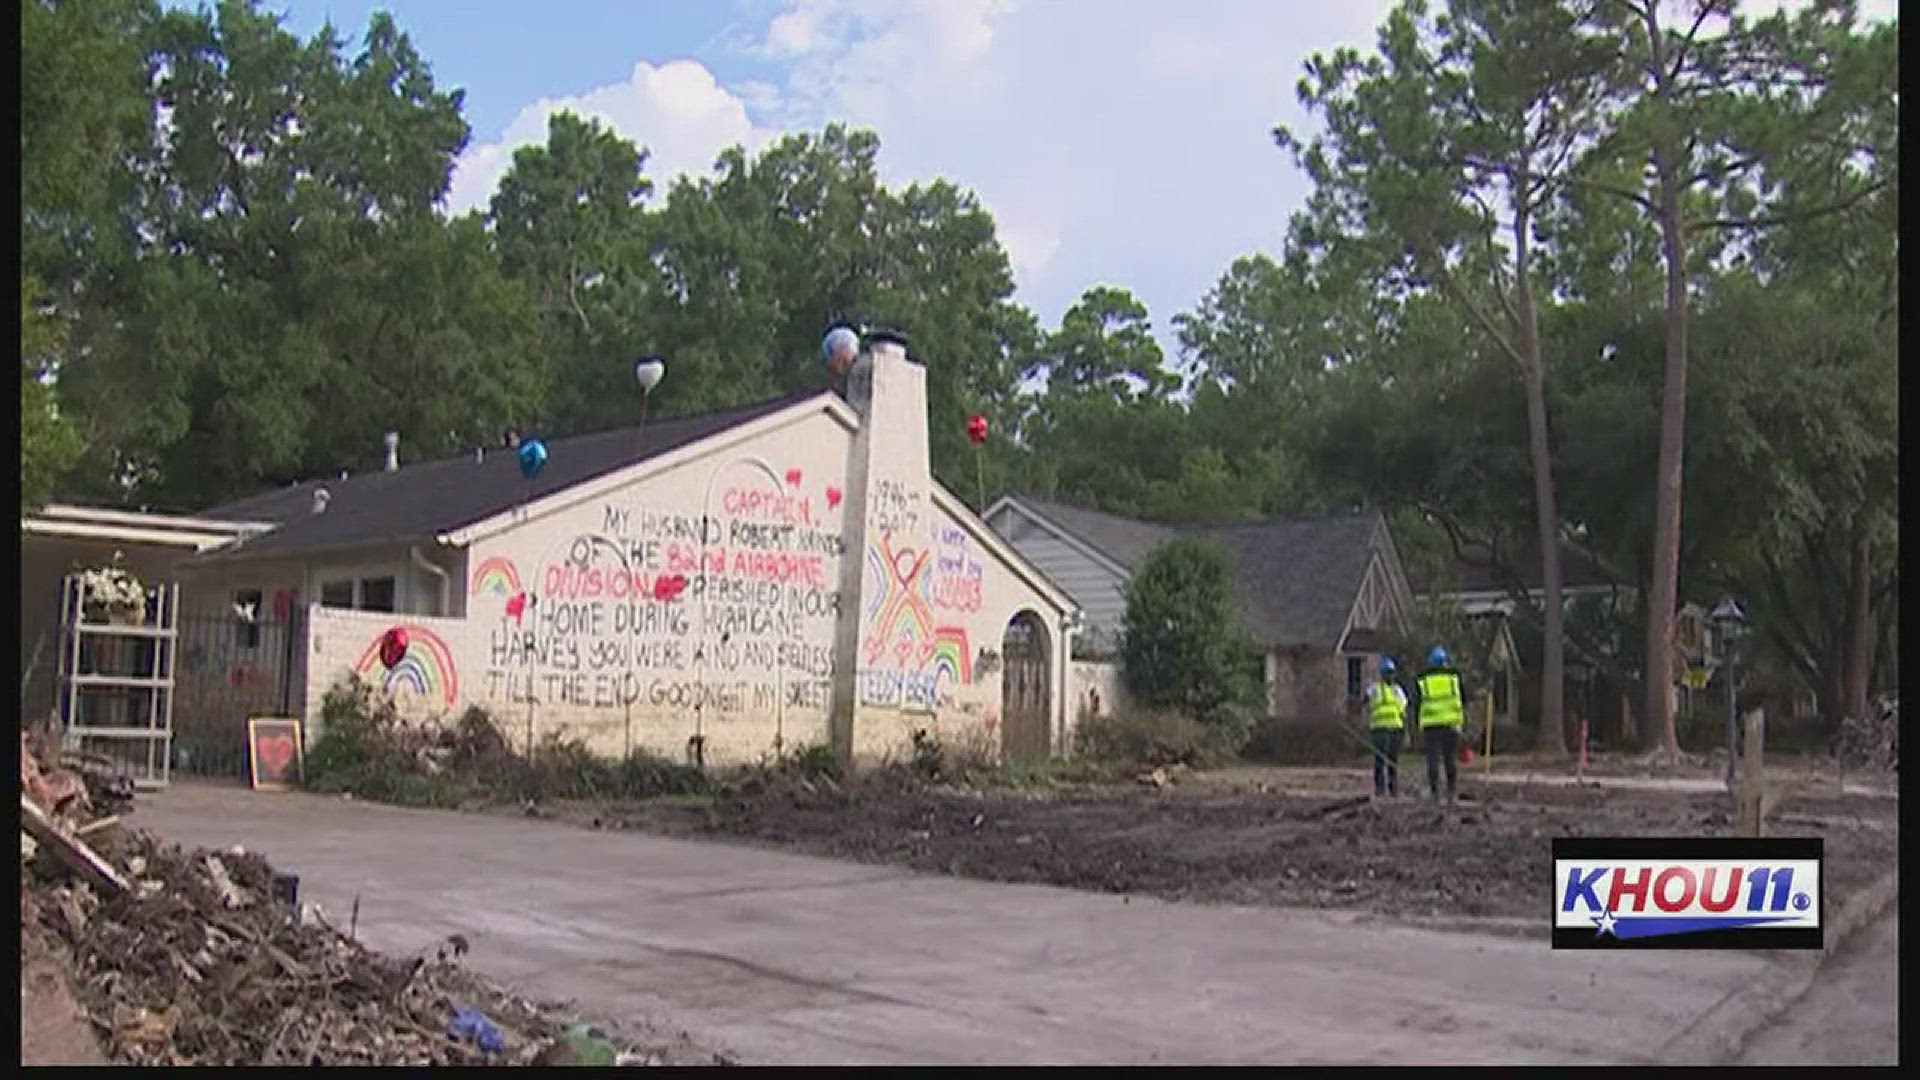 Amidst the contractors working on homes in west Houston is a house with a moving tribute to 71-year-old Robert Haines.